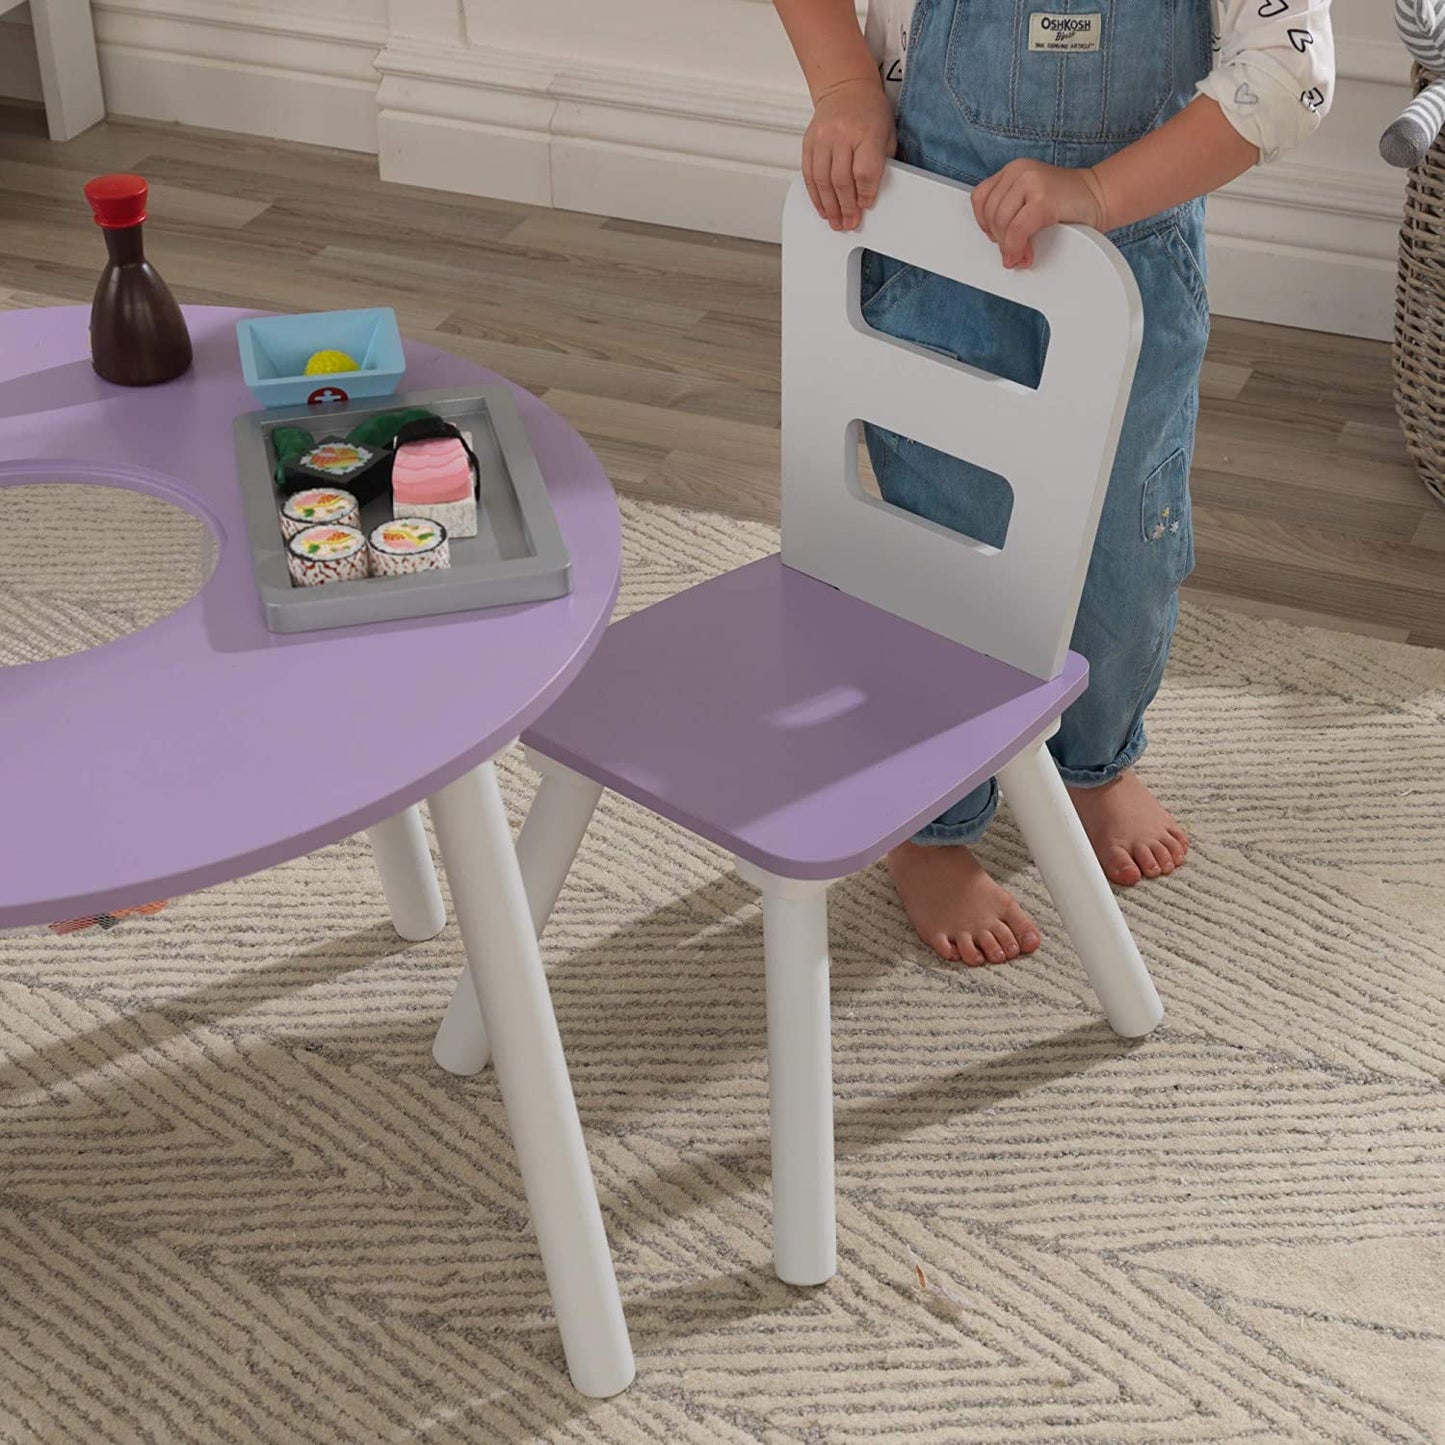 Round Table and 2 Chair Set for children (Lavender) - Little Kids Business